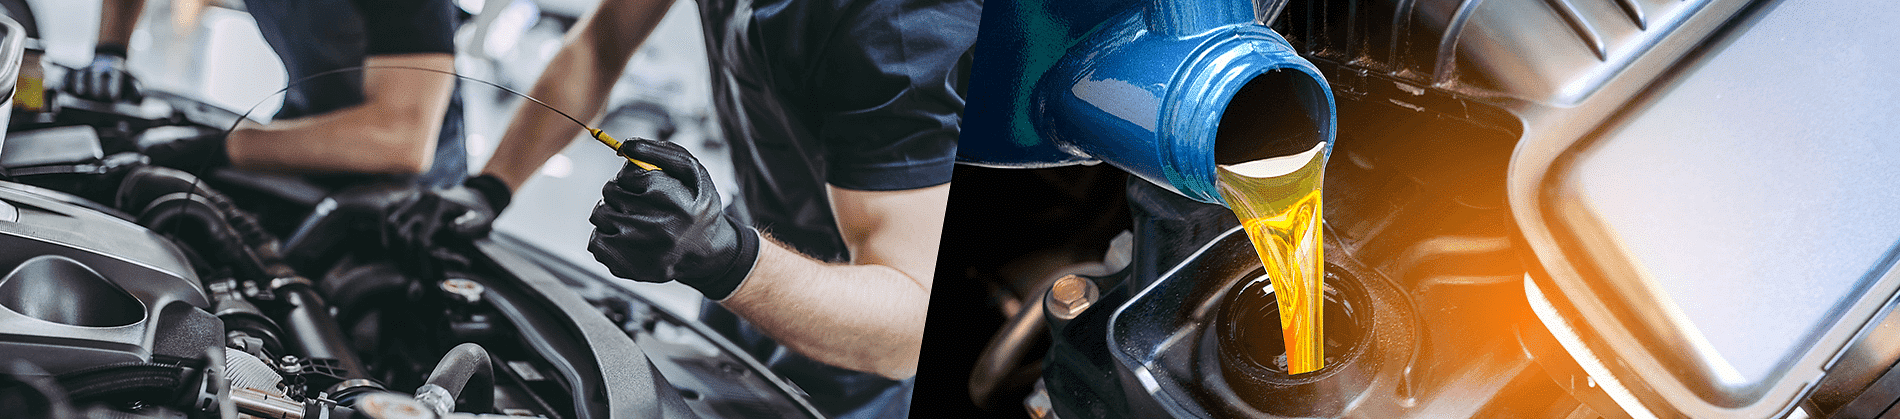 split photo. Mechanic checking engine oil level on left. Mechanic pouring oil into the engine, on the right